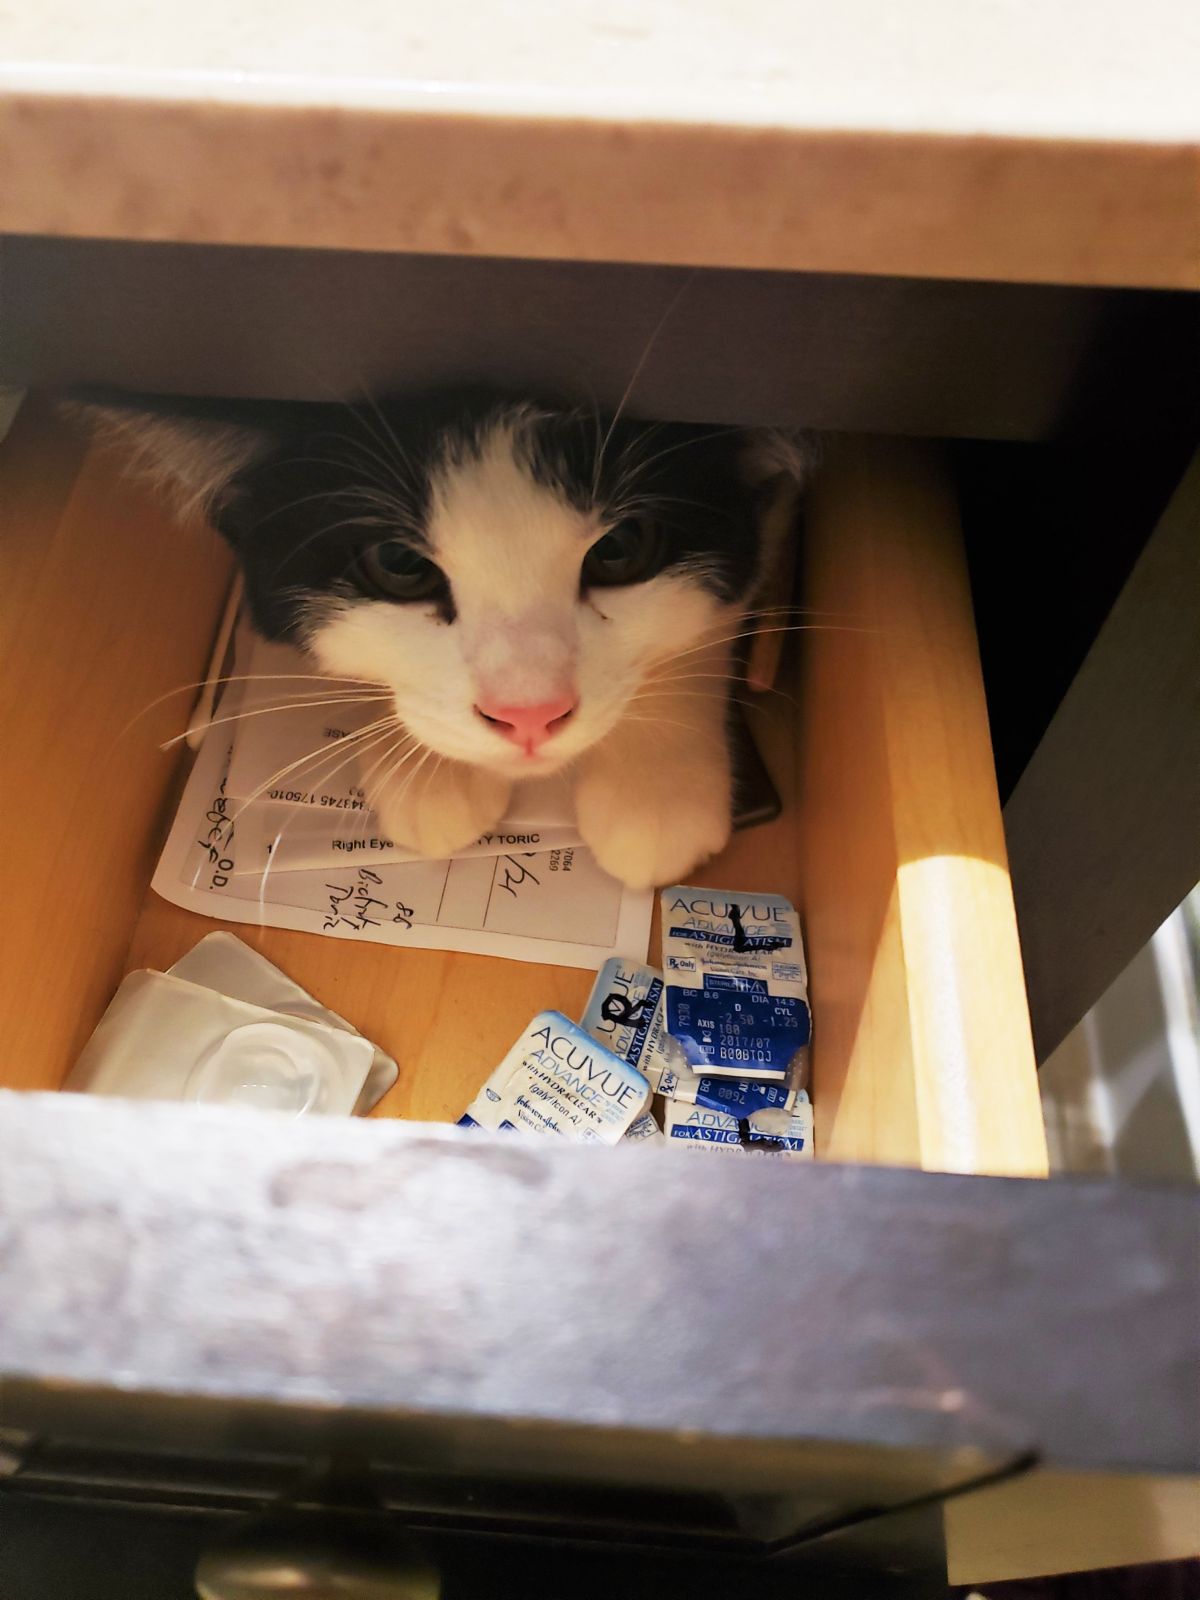 black and white cat squeezed into a bathroom vanity cabinet drawer.